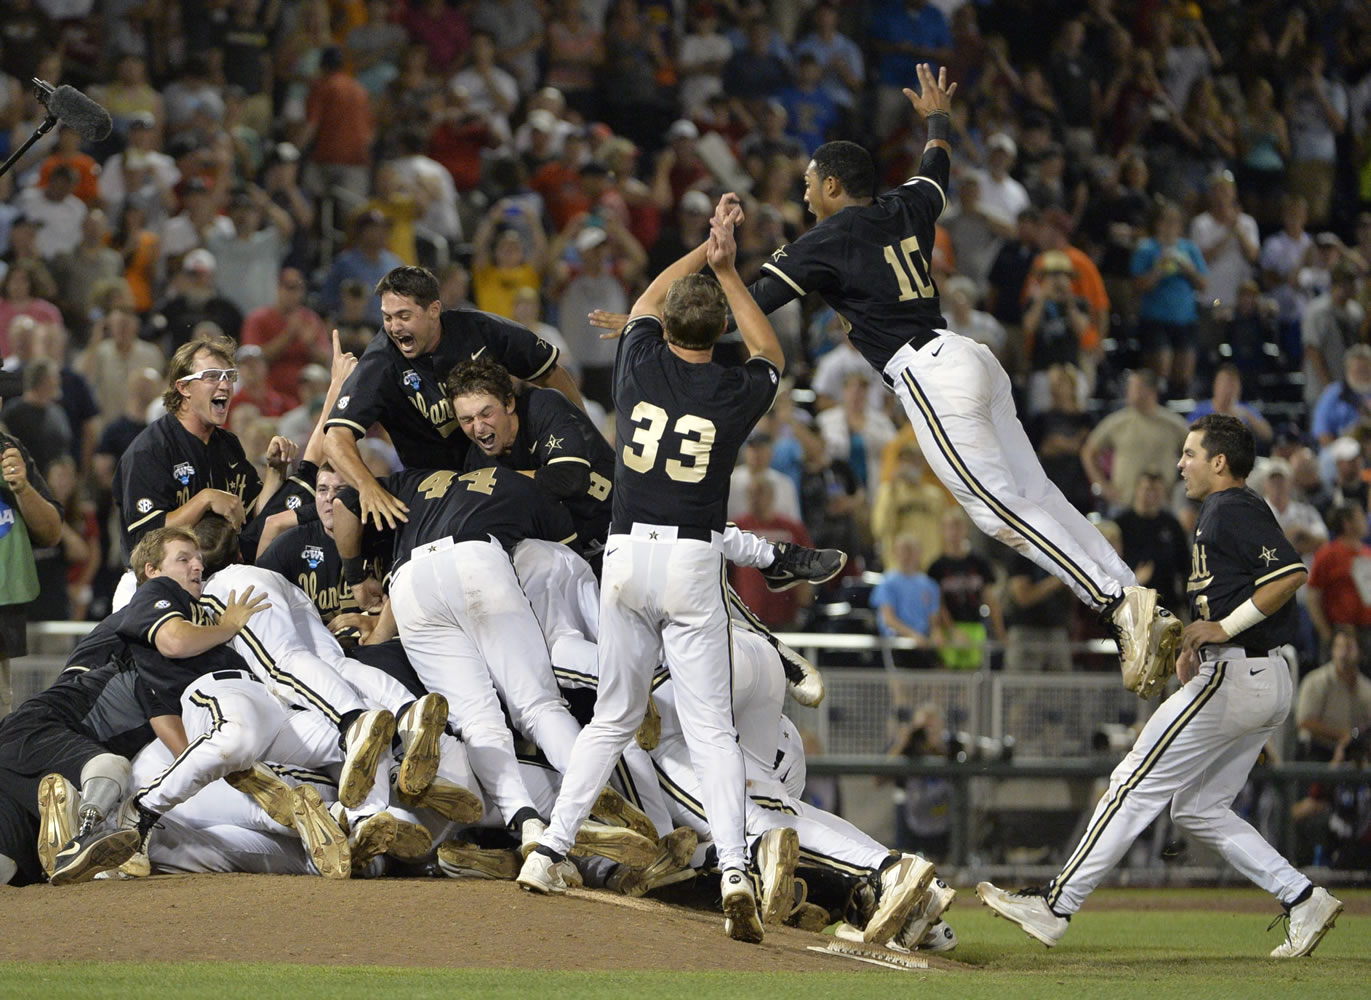 Vanderbilt players, including John Norwood (10), celebrate after defeating Virginia 3-2 in the deciding game of the best-of-three NCAA baseball College World Series finals in Omaha, Neb., Wednesday, June 25, 2014.